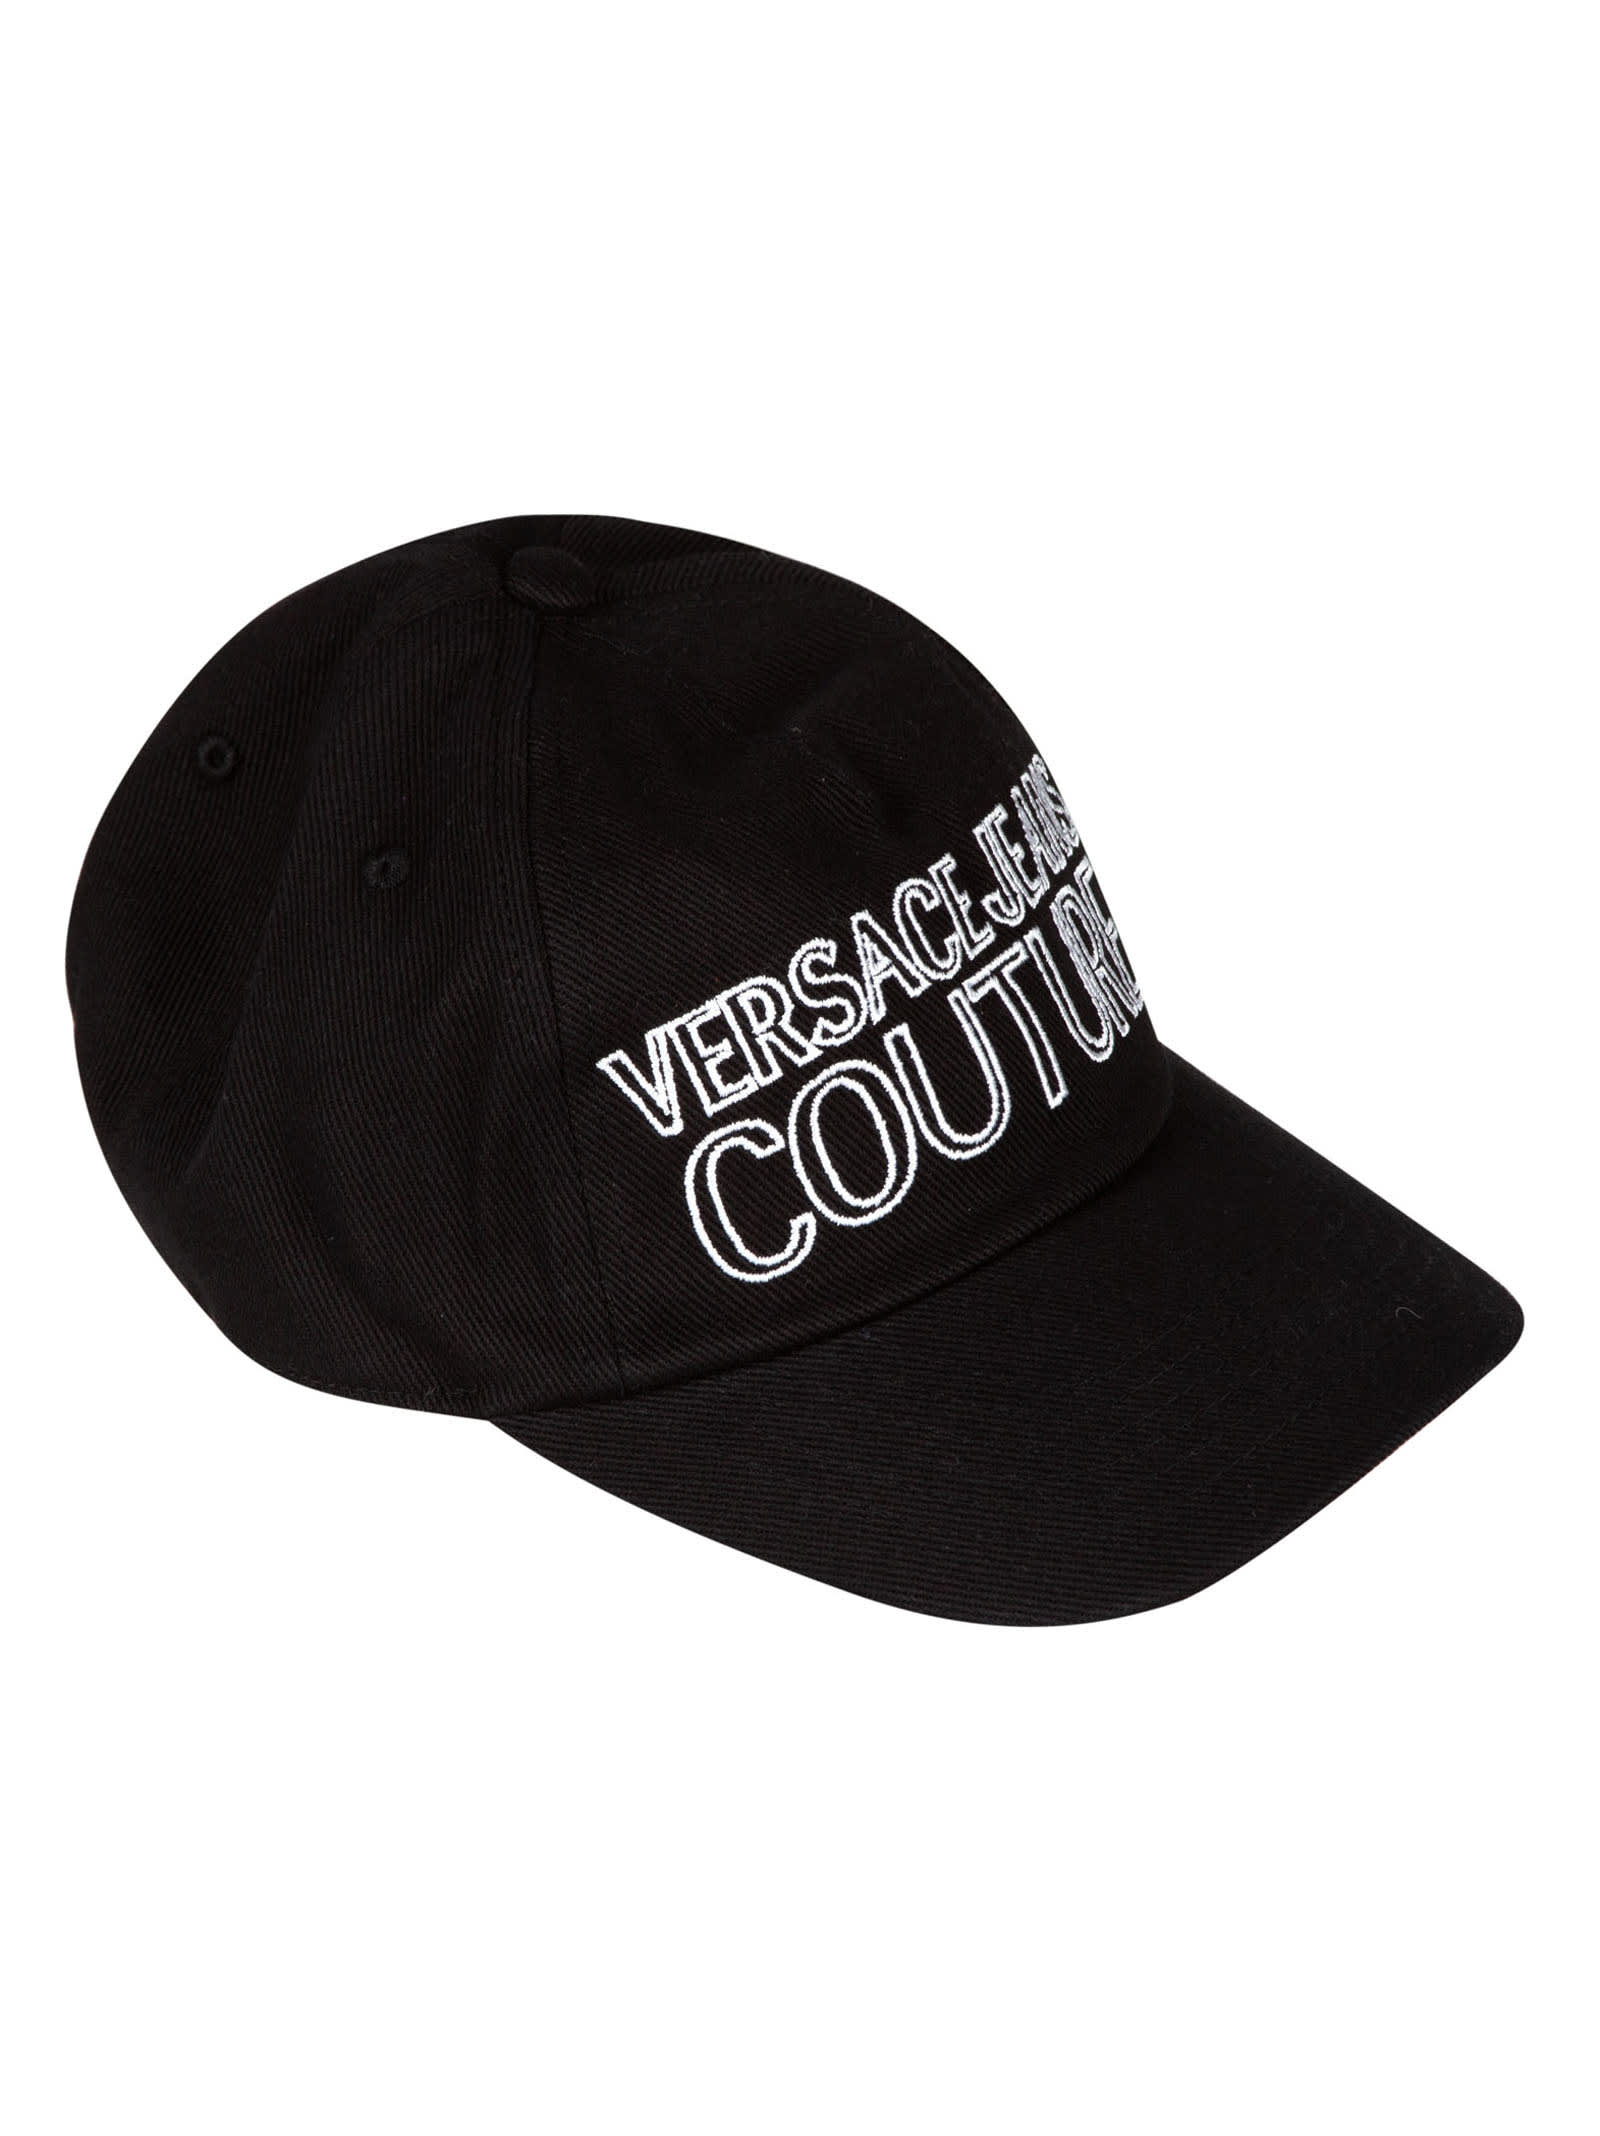 VERSACE JEANS COUTURE COUTURE BASEBALL CAP,71YAZK11-ZG010-899